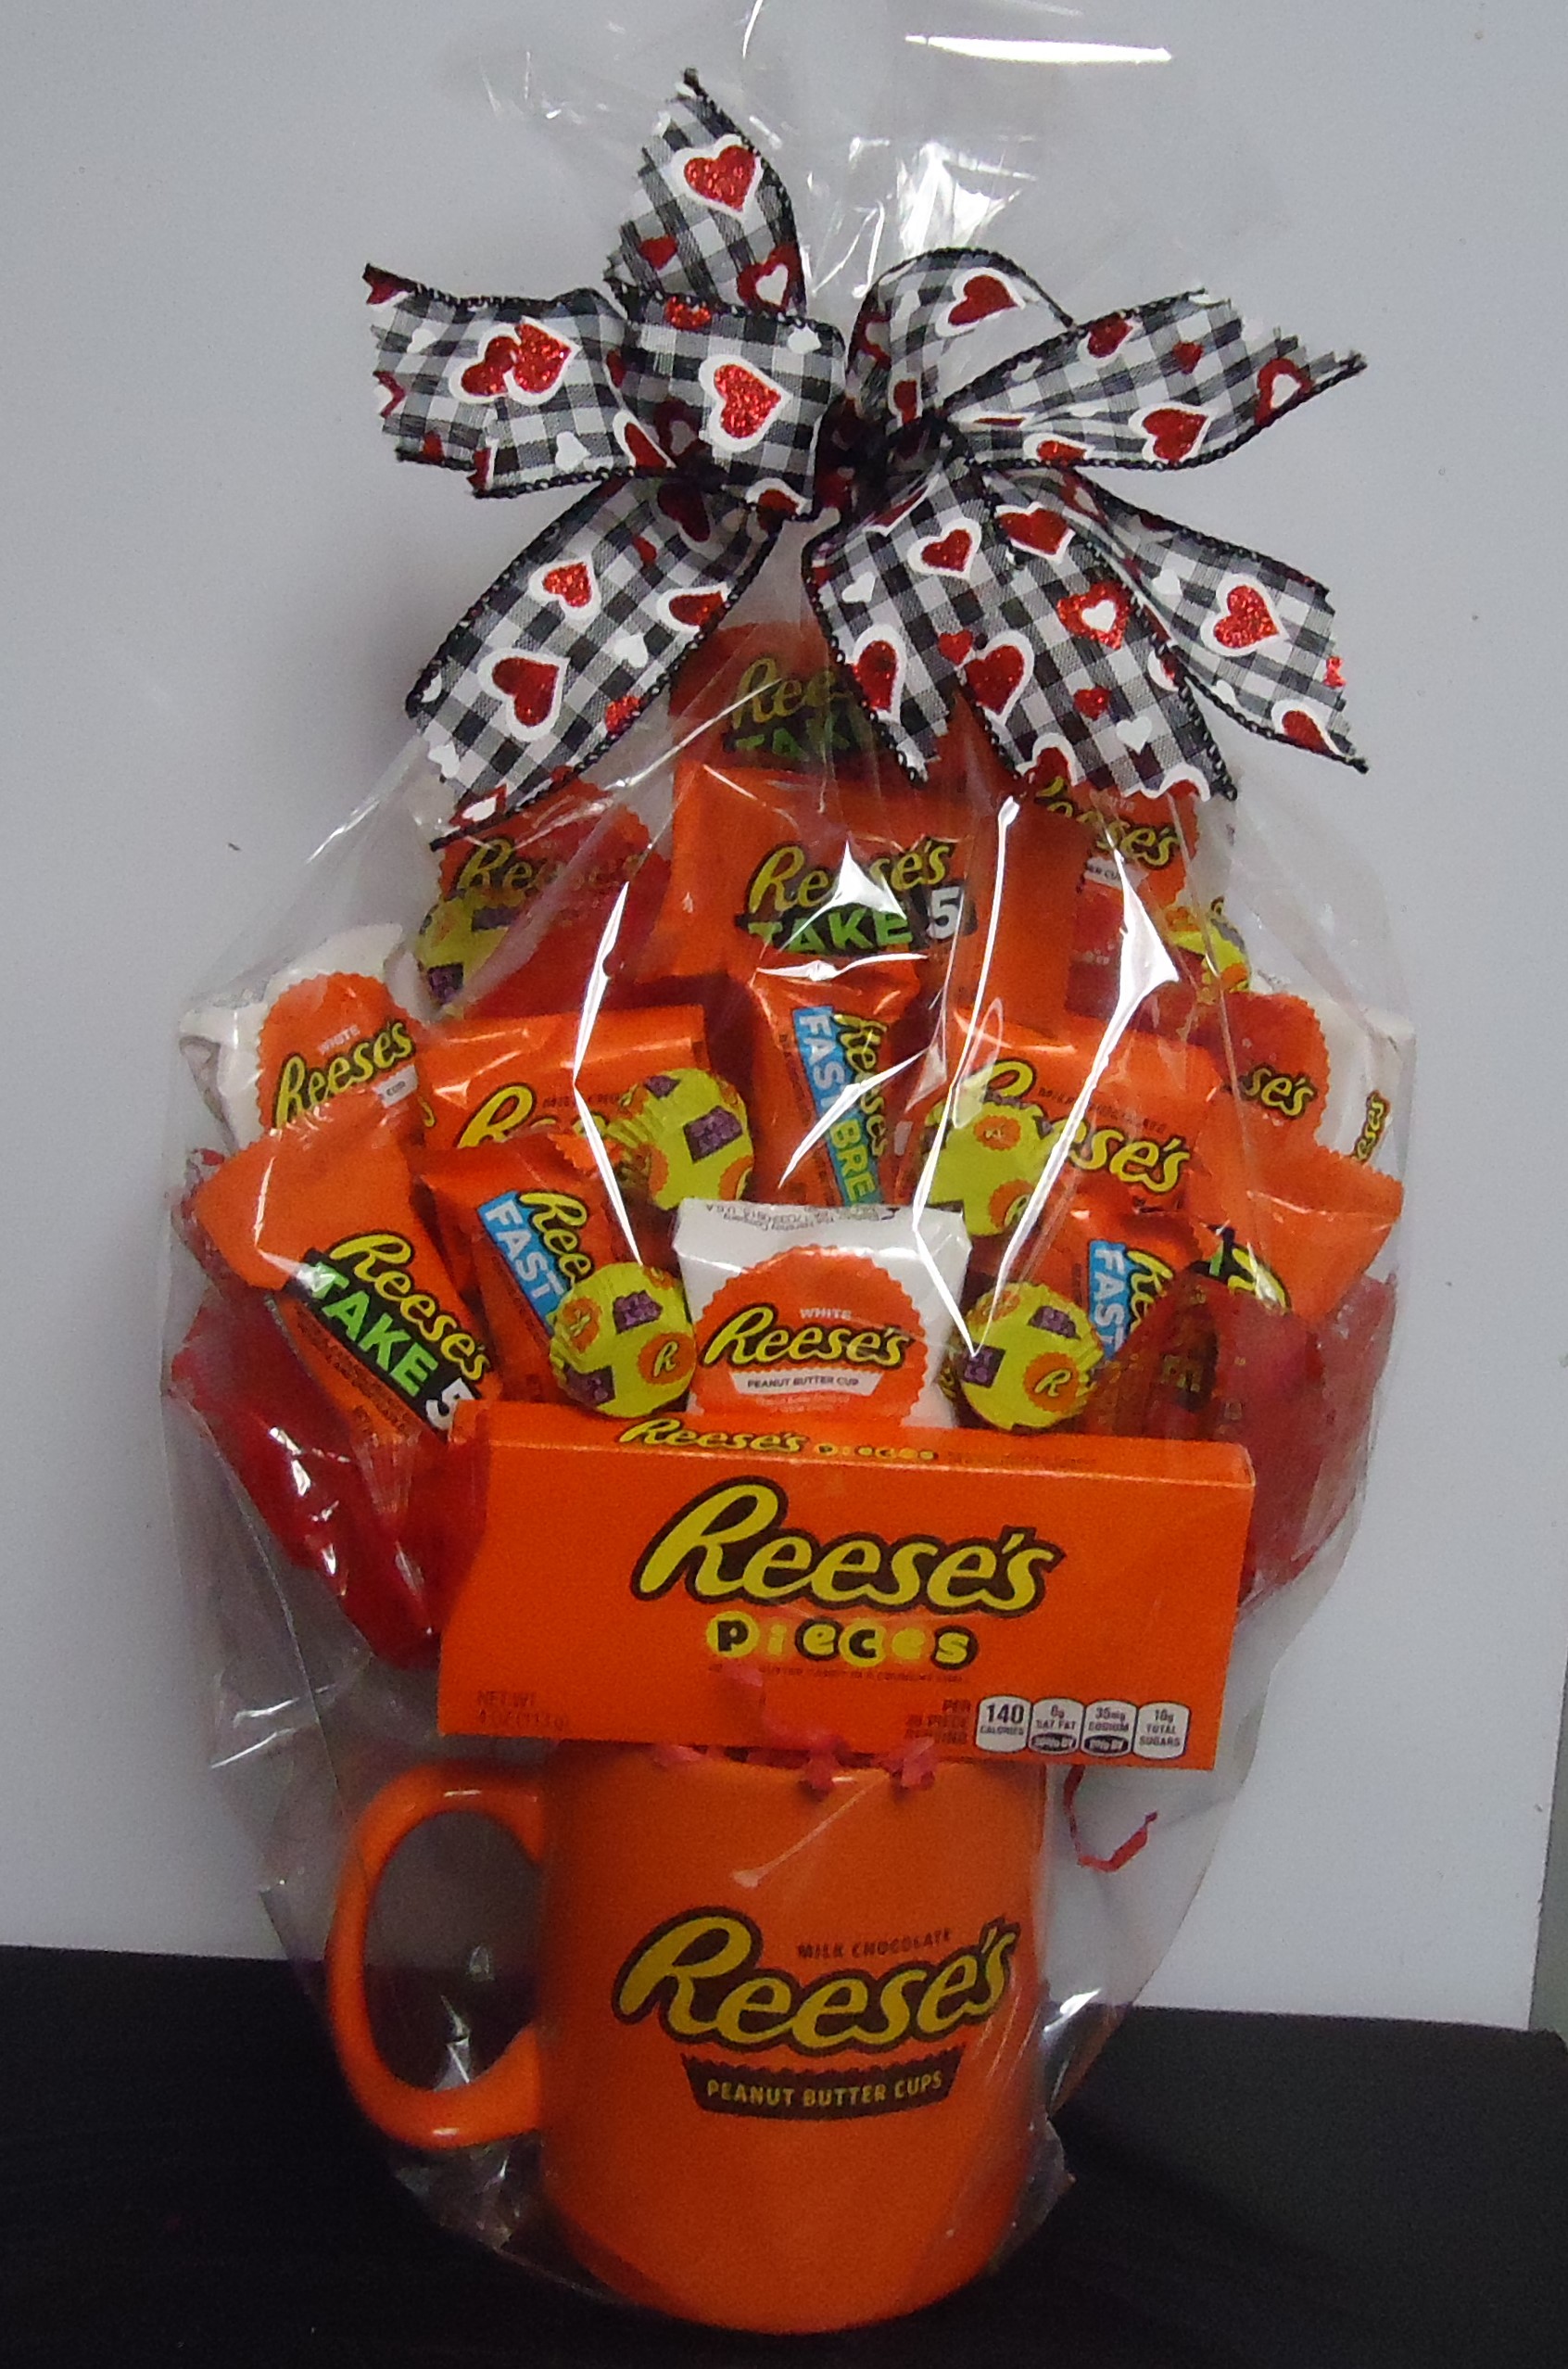 (8A) "Reese's" Candy Bouquet
$40.00
(2 Left)